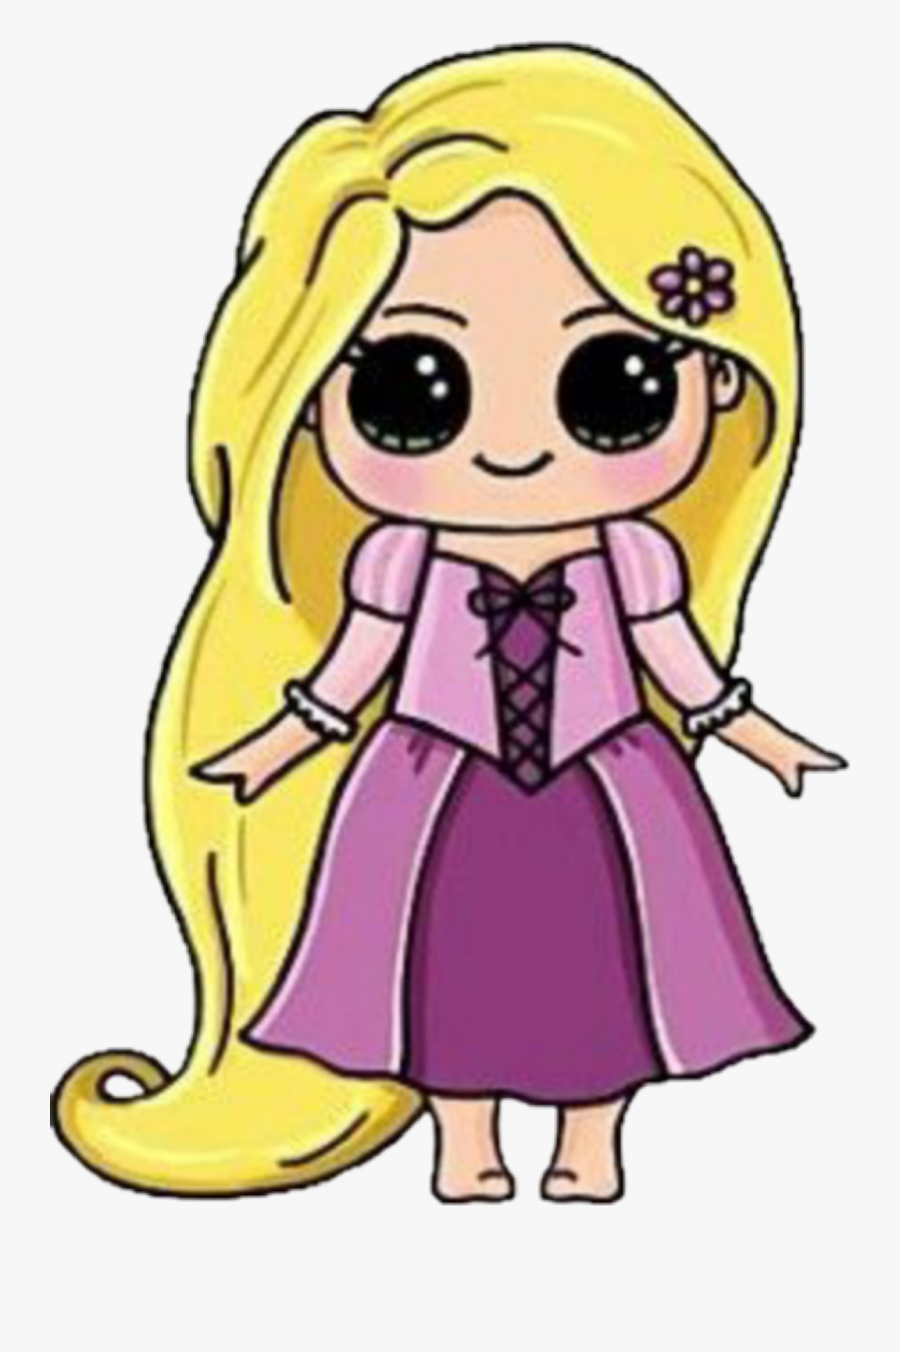 #rapunzel #tangled - Easy Draw So Cute Girl, Transparent Clipart